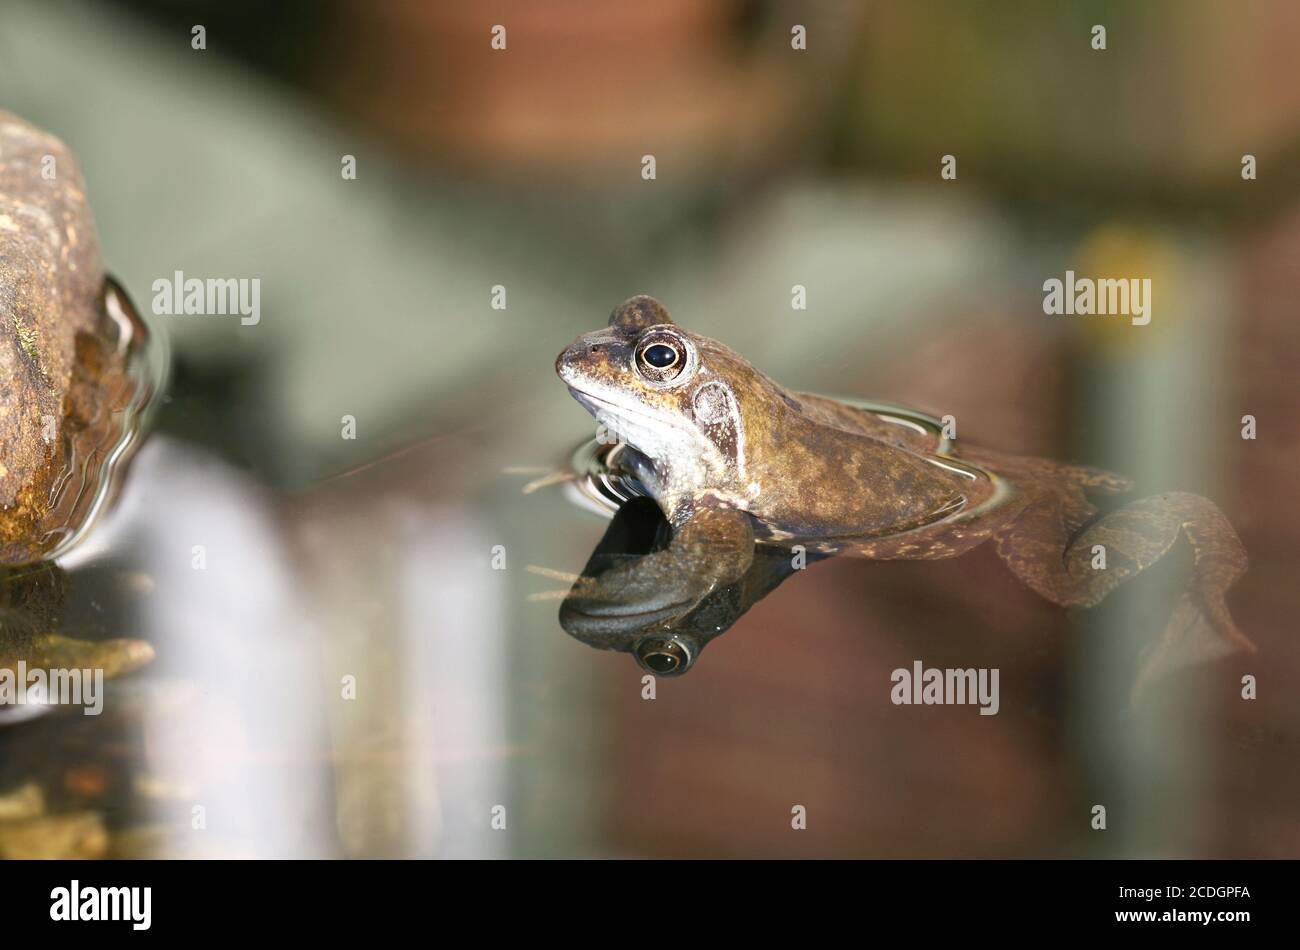 Reflections of a Frog Stock Photo